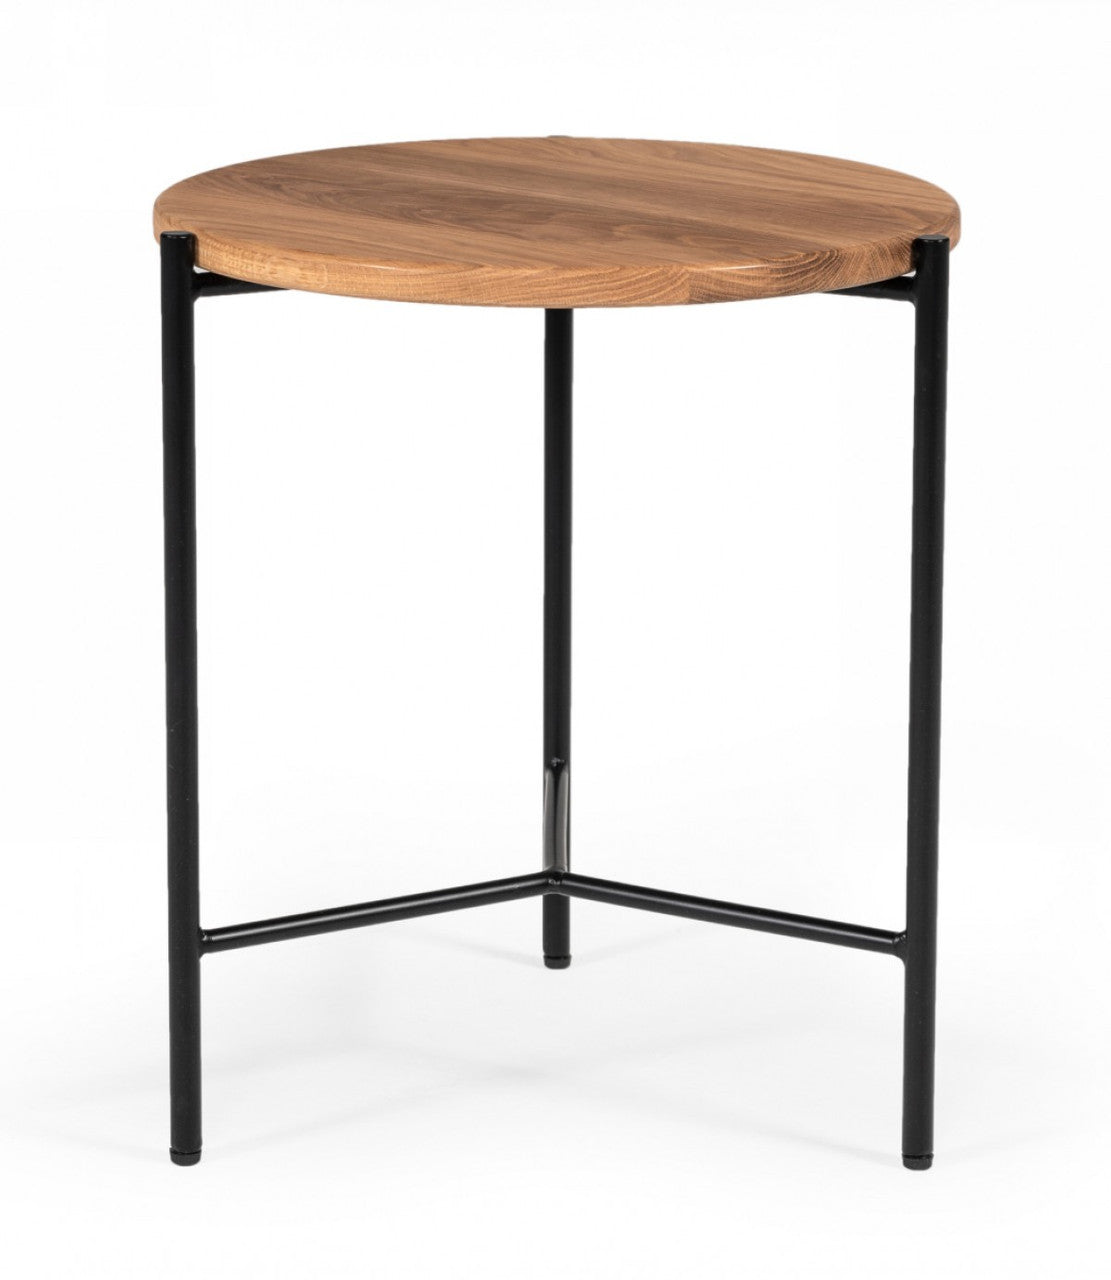 Modrest Bacone Industrial Oak and Black Iron End Table